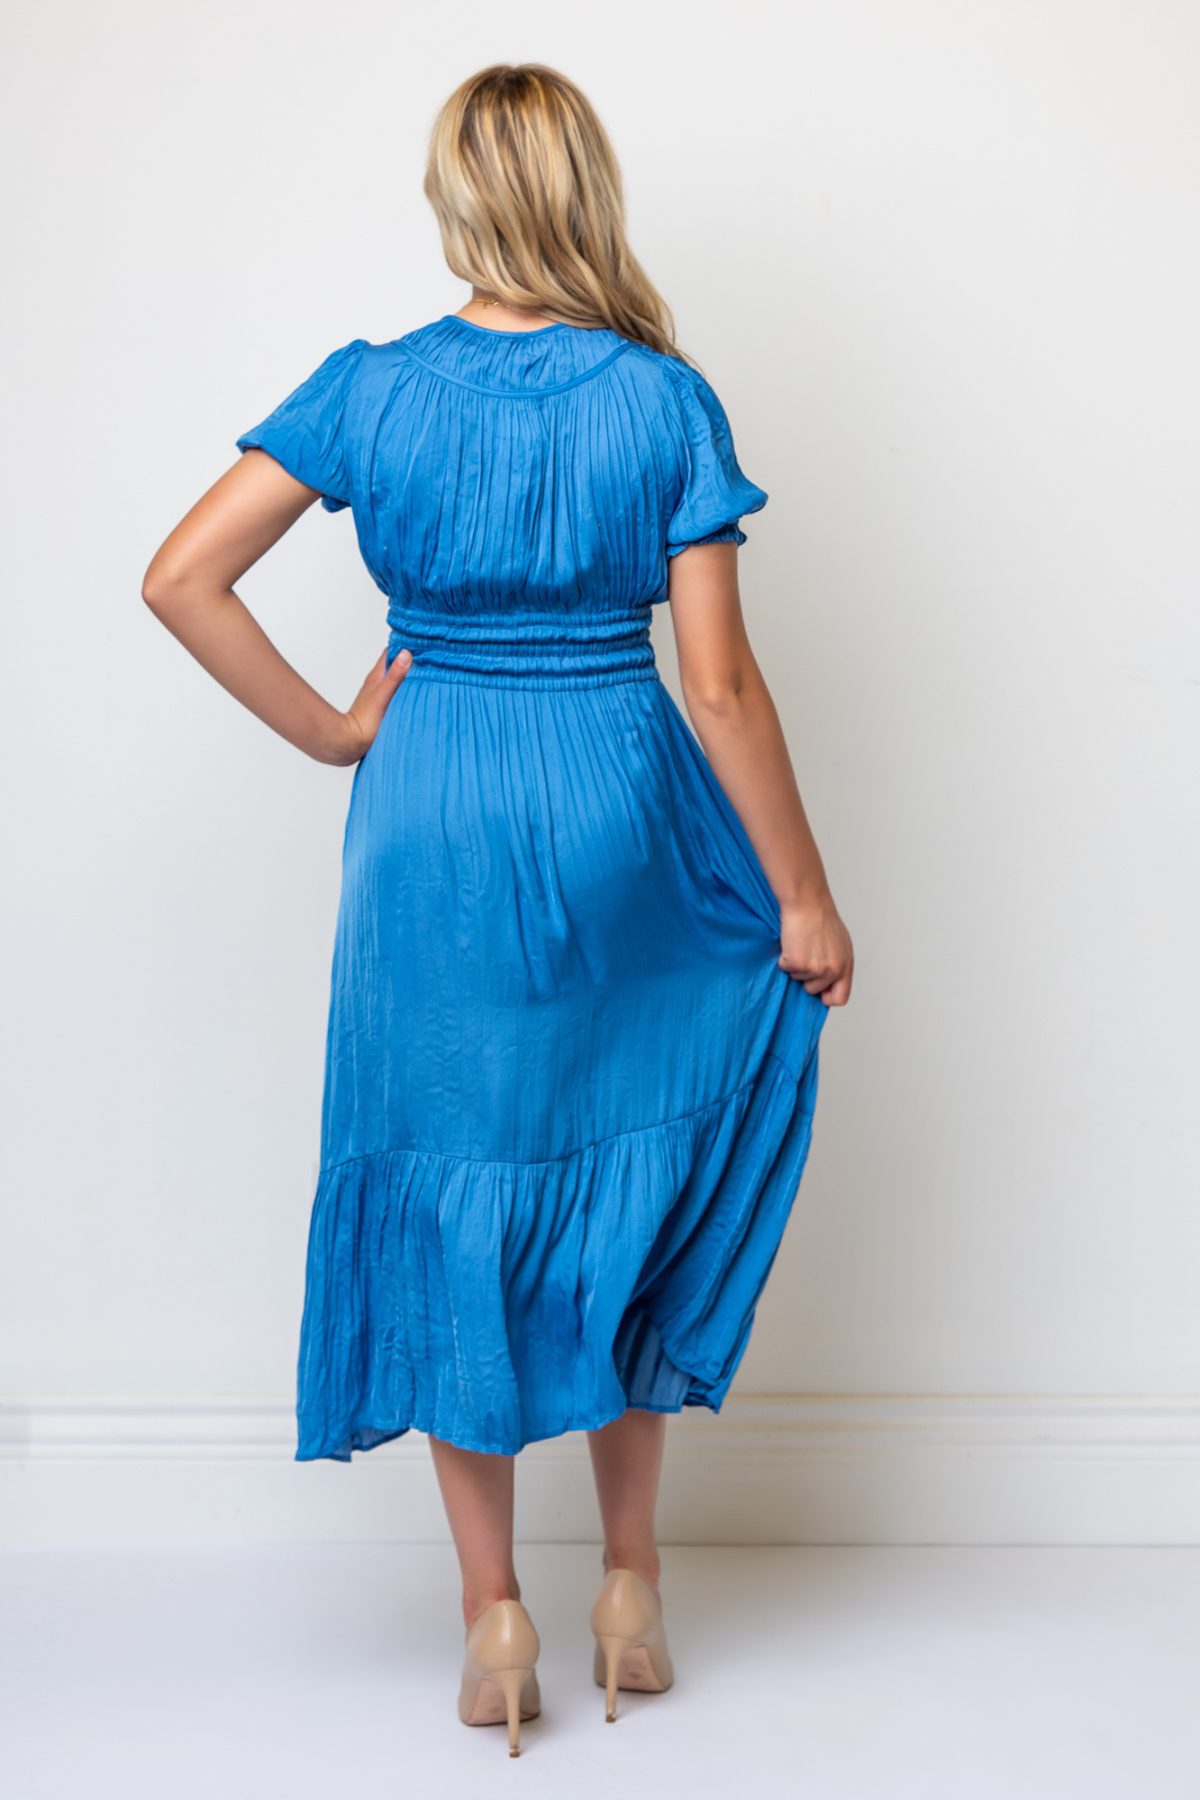 Current Air: Solis Crinkled Ruch Dress - RESTOCKED